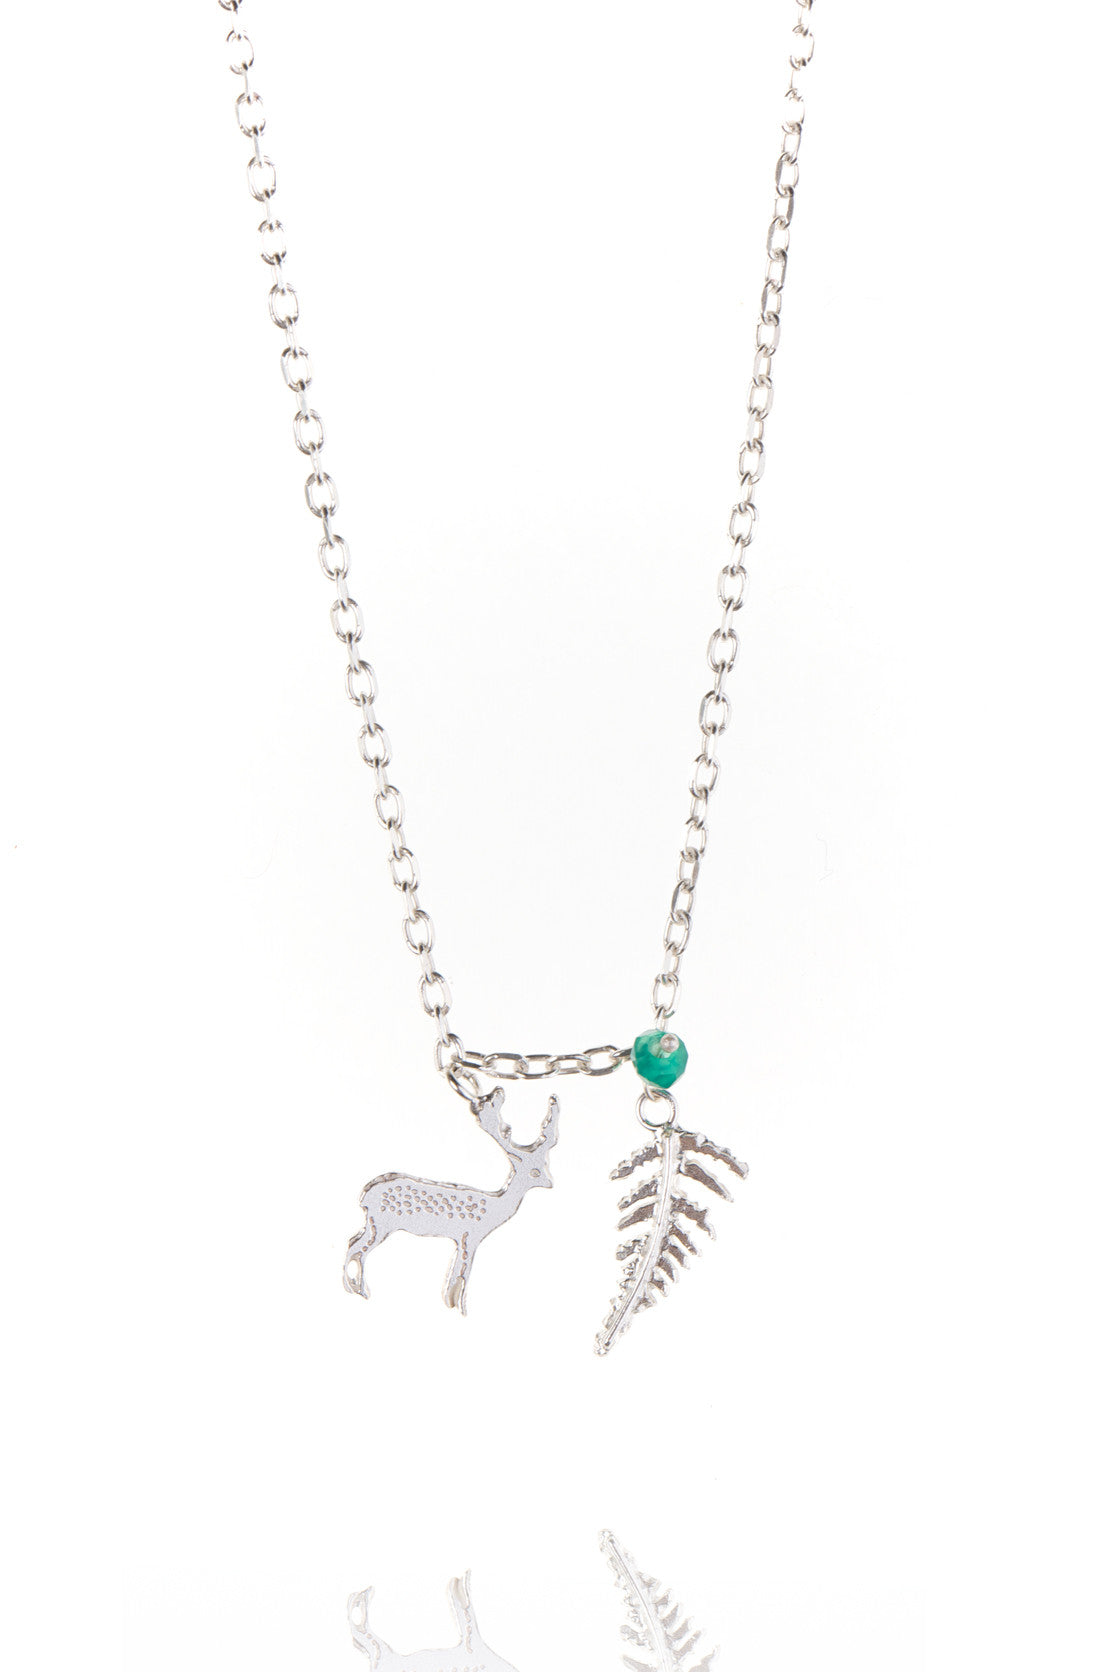 Stag and Fern Pendant